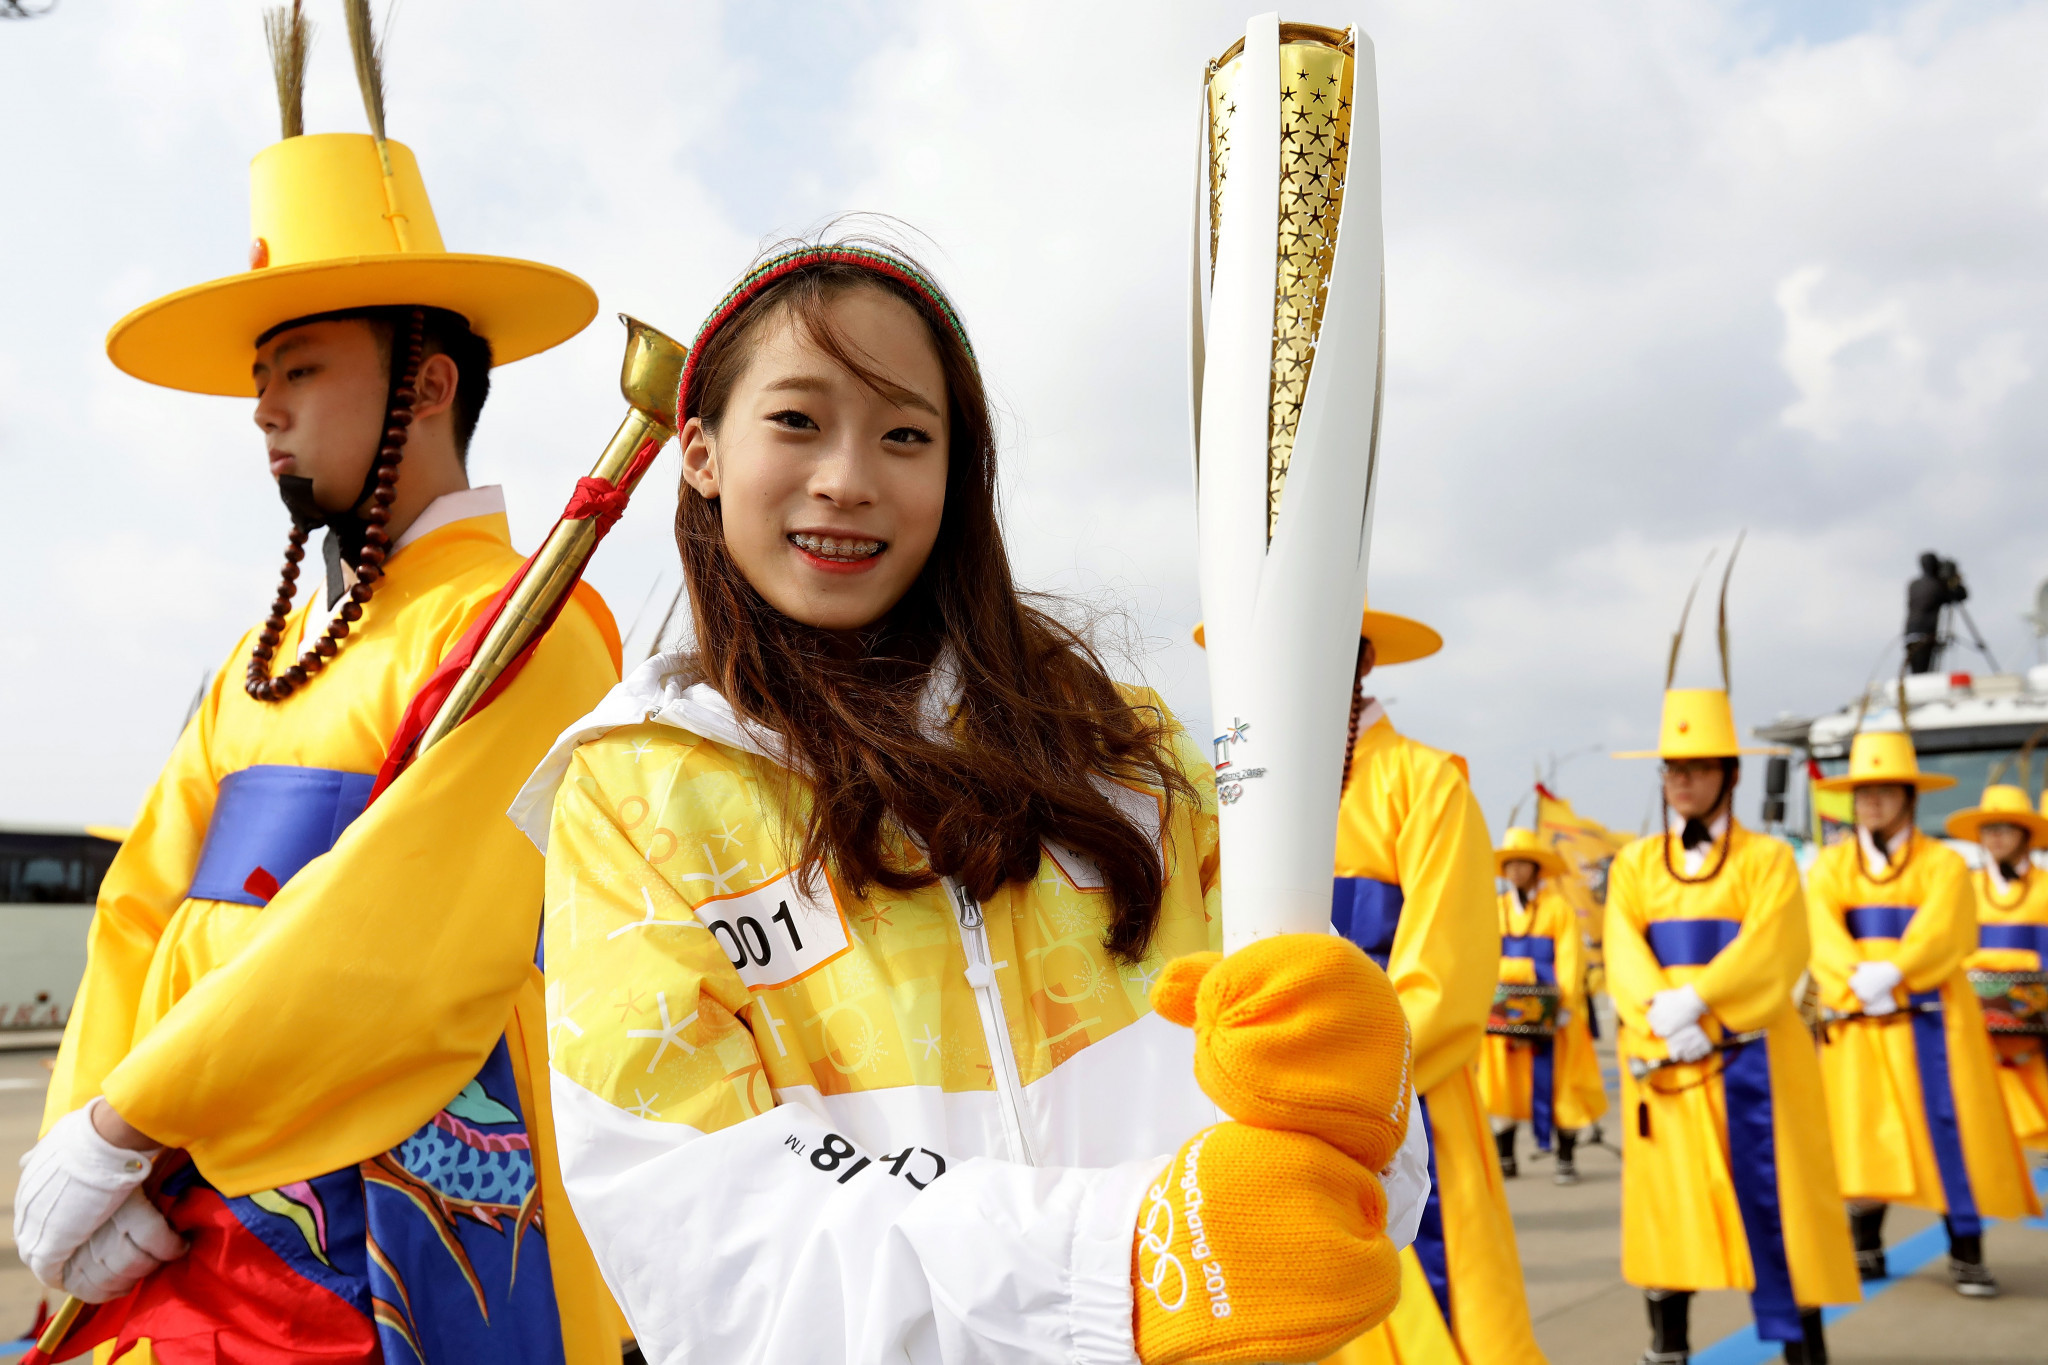 Olympic flame touches down in South Korea amid a blaze of glory to ignite Pyeongchang 2018